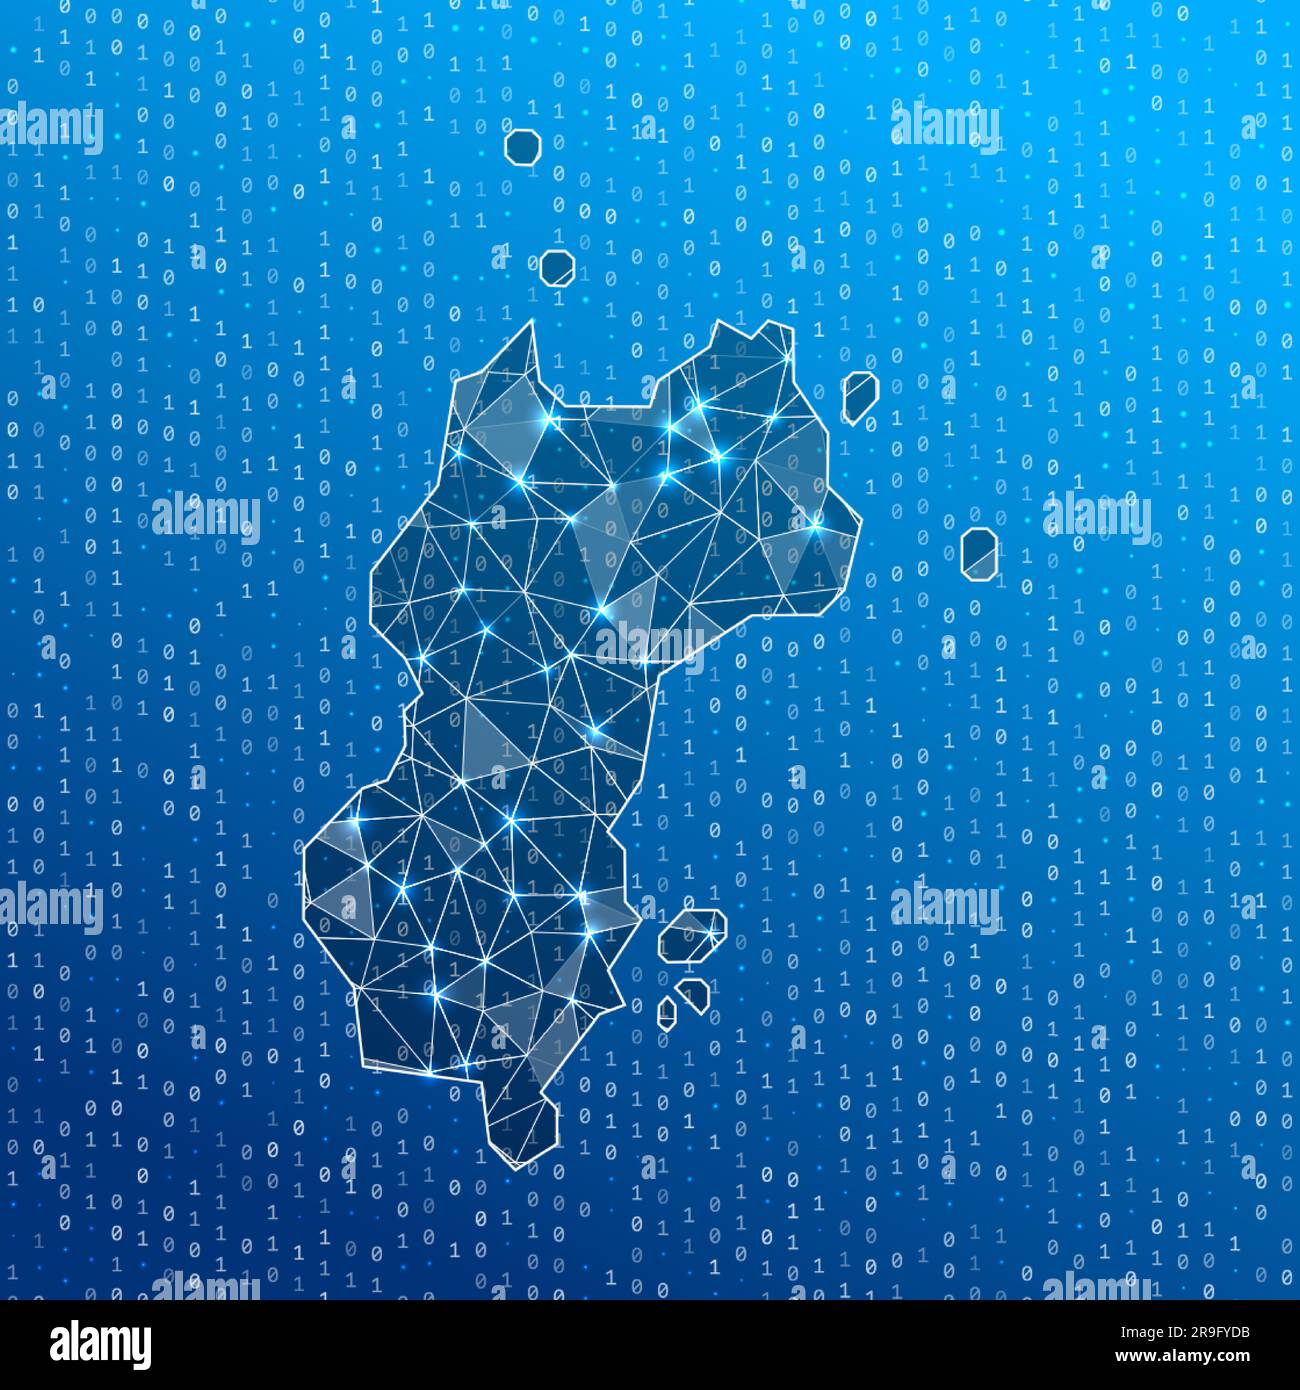 Network map of Mustique. Island digital connections map. Technology ...